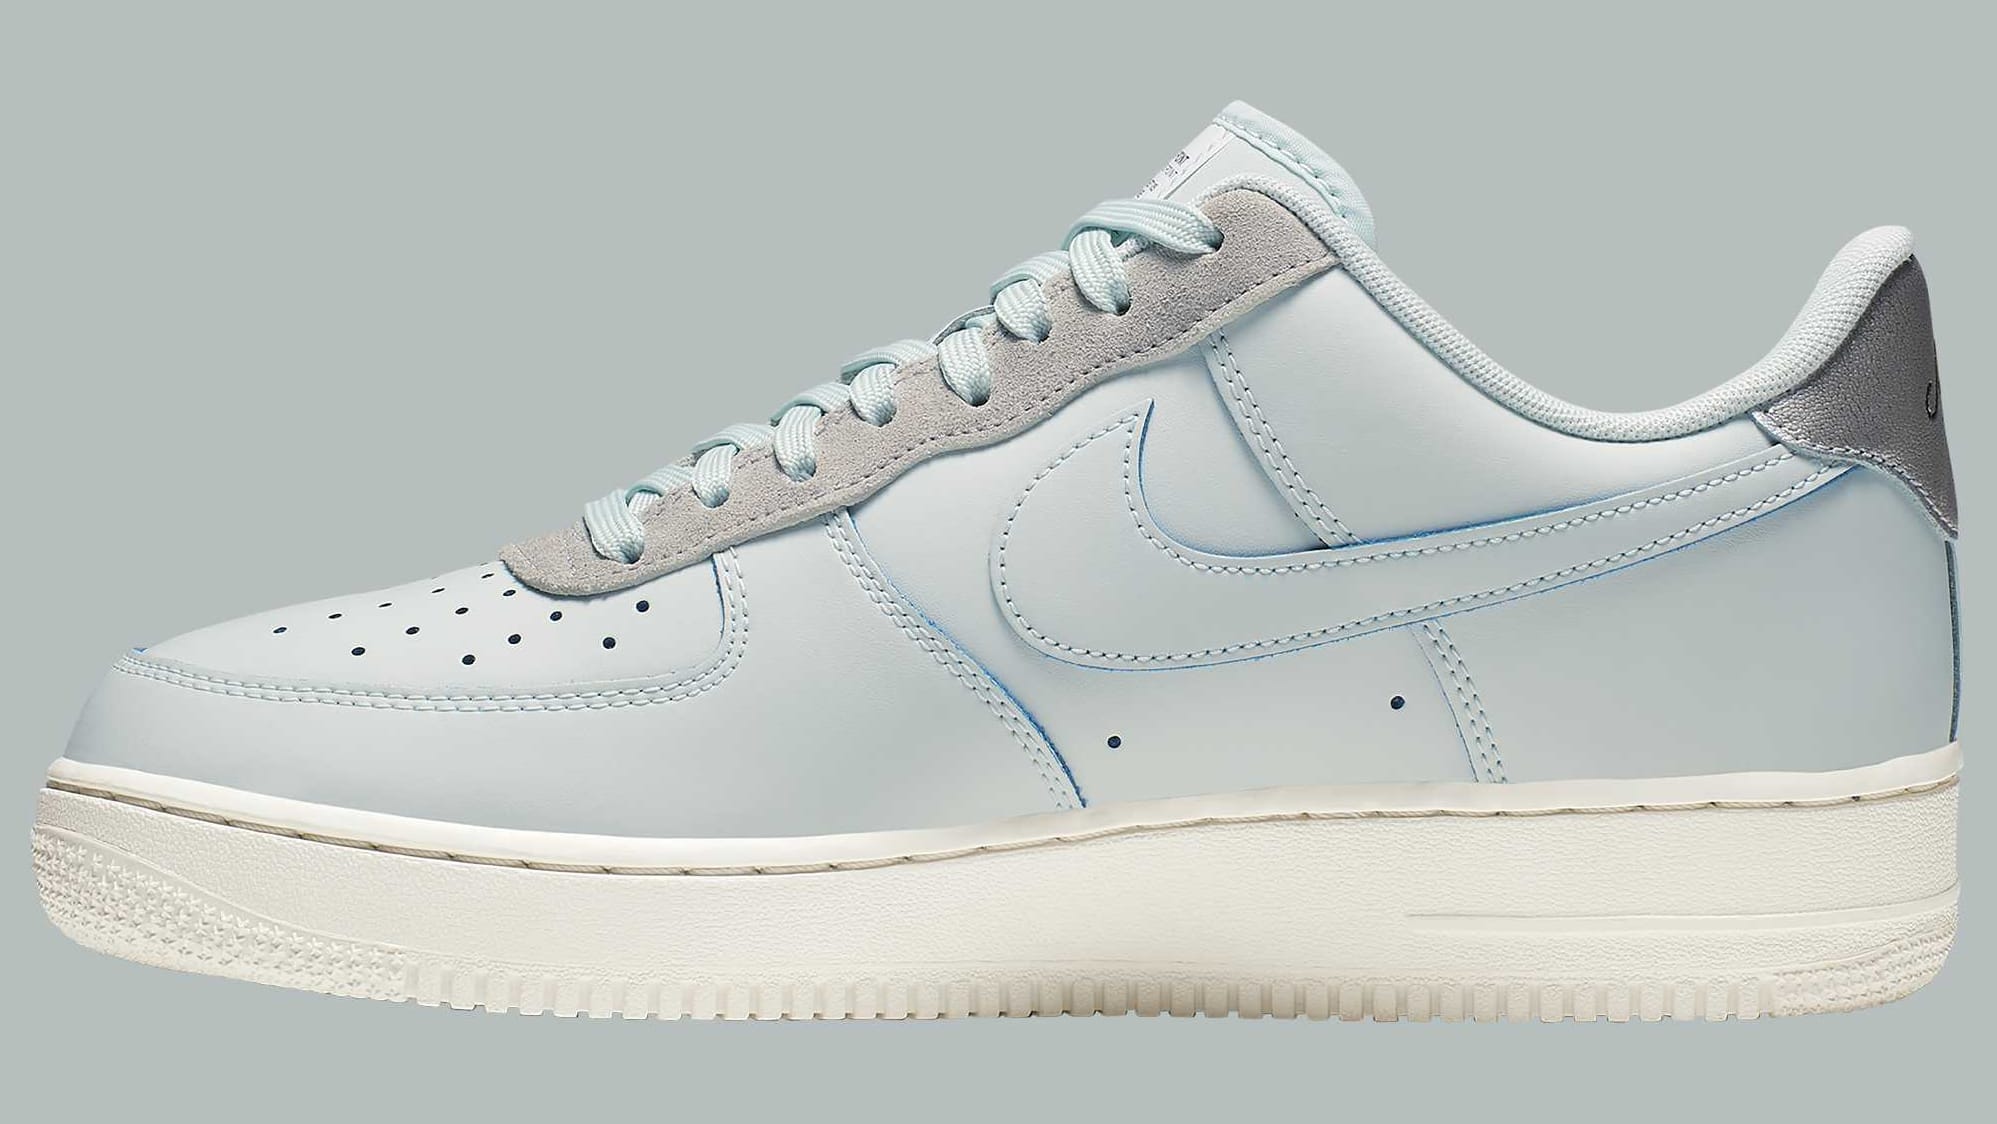 Devin Booker Has His Very Own Nike Air Force 1 Low Way Complex